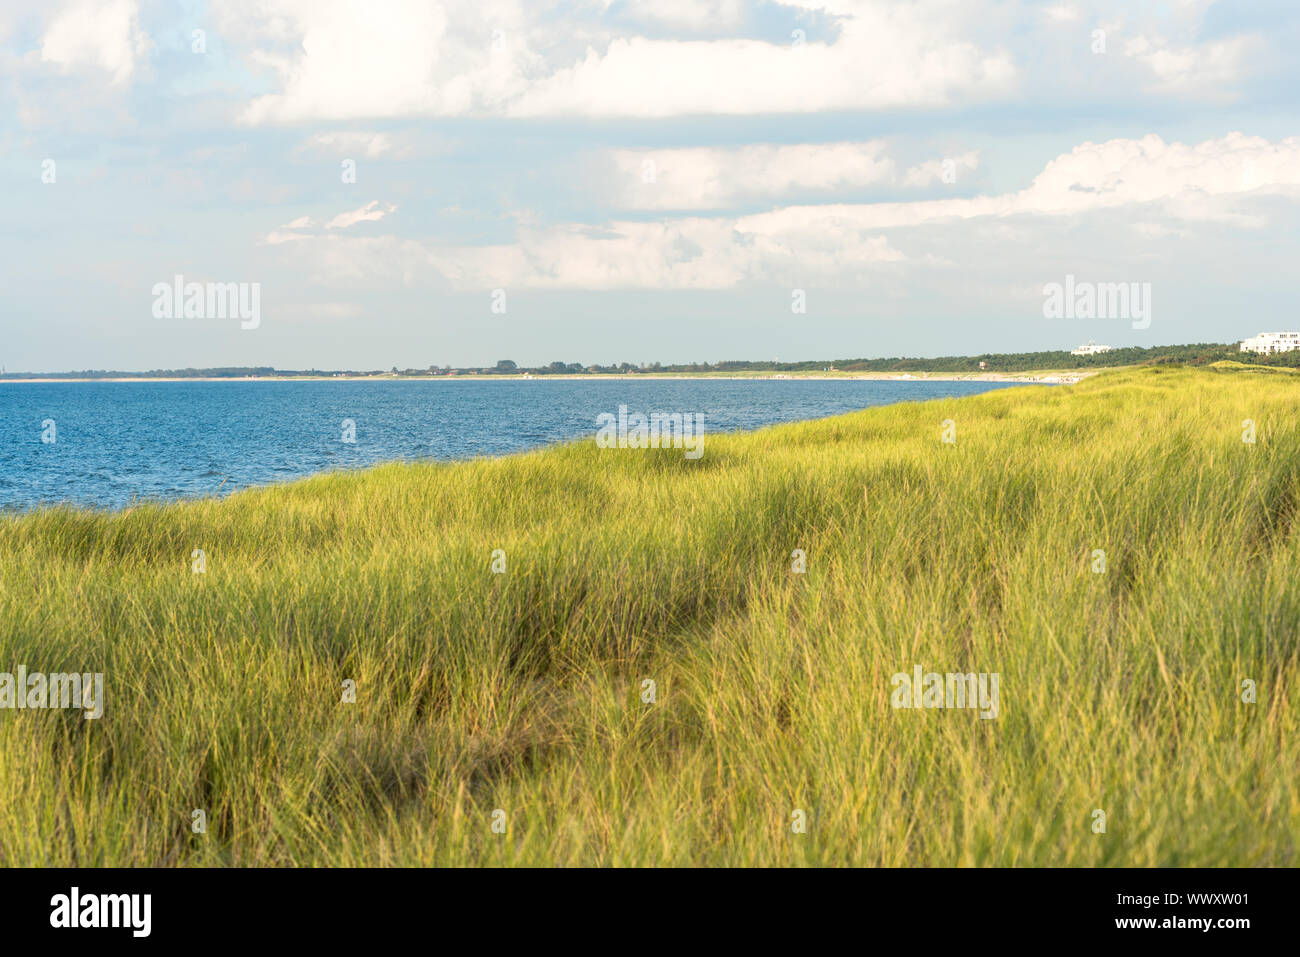 The Baltic Sea in northern region of the federal state Mecklenburg Vorpommern, Germany Stock Photo